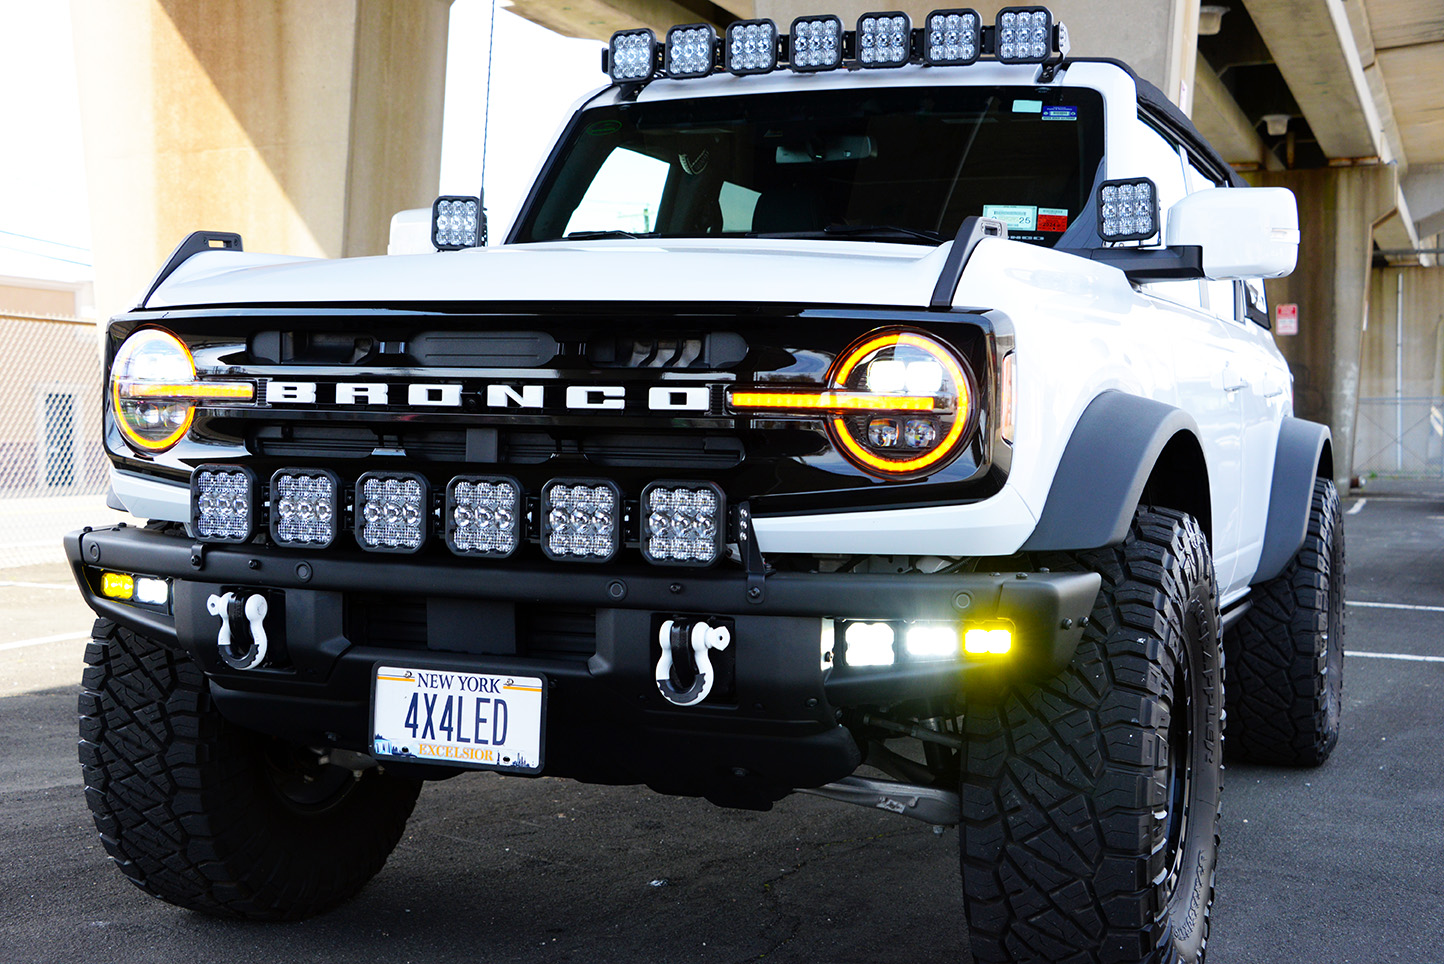 Ford Bronco TRIPLE FOG KITS | New Flush Mount Kit Now Available at 4x4TruckLEDs.com 55